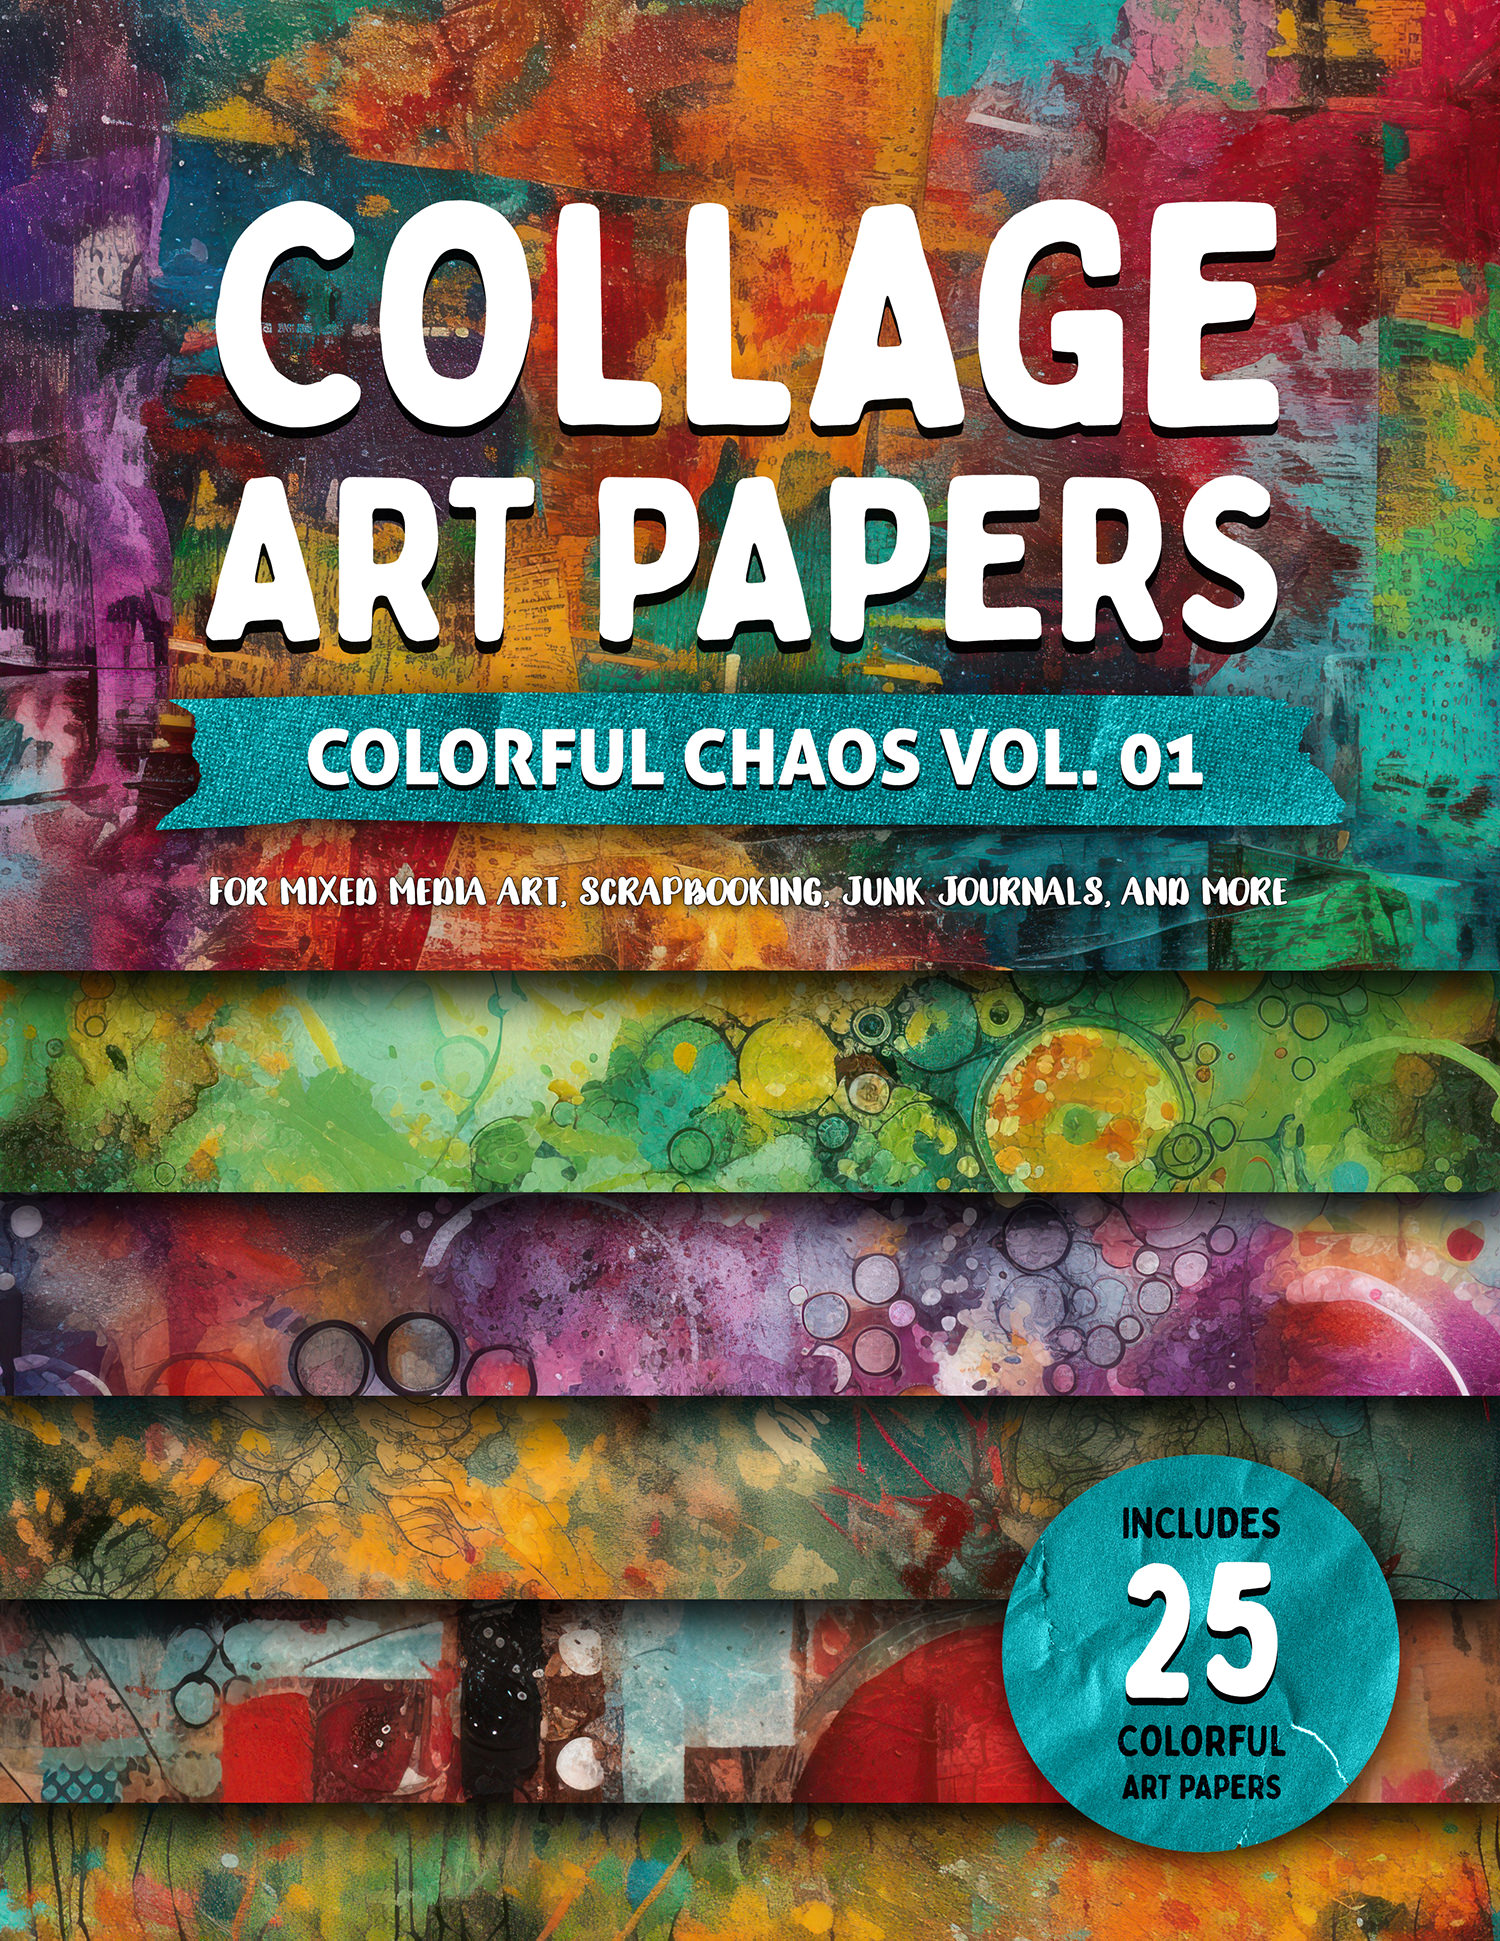 Collage Art Papers: Colorful Chaos Vol. 01